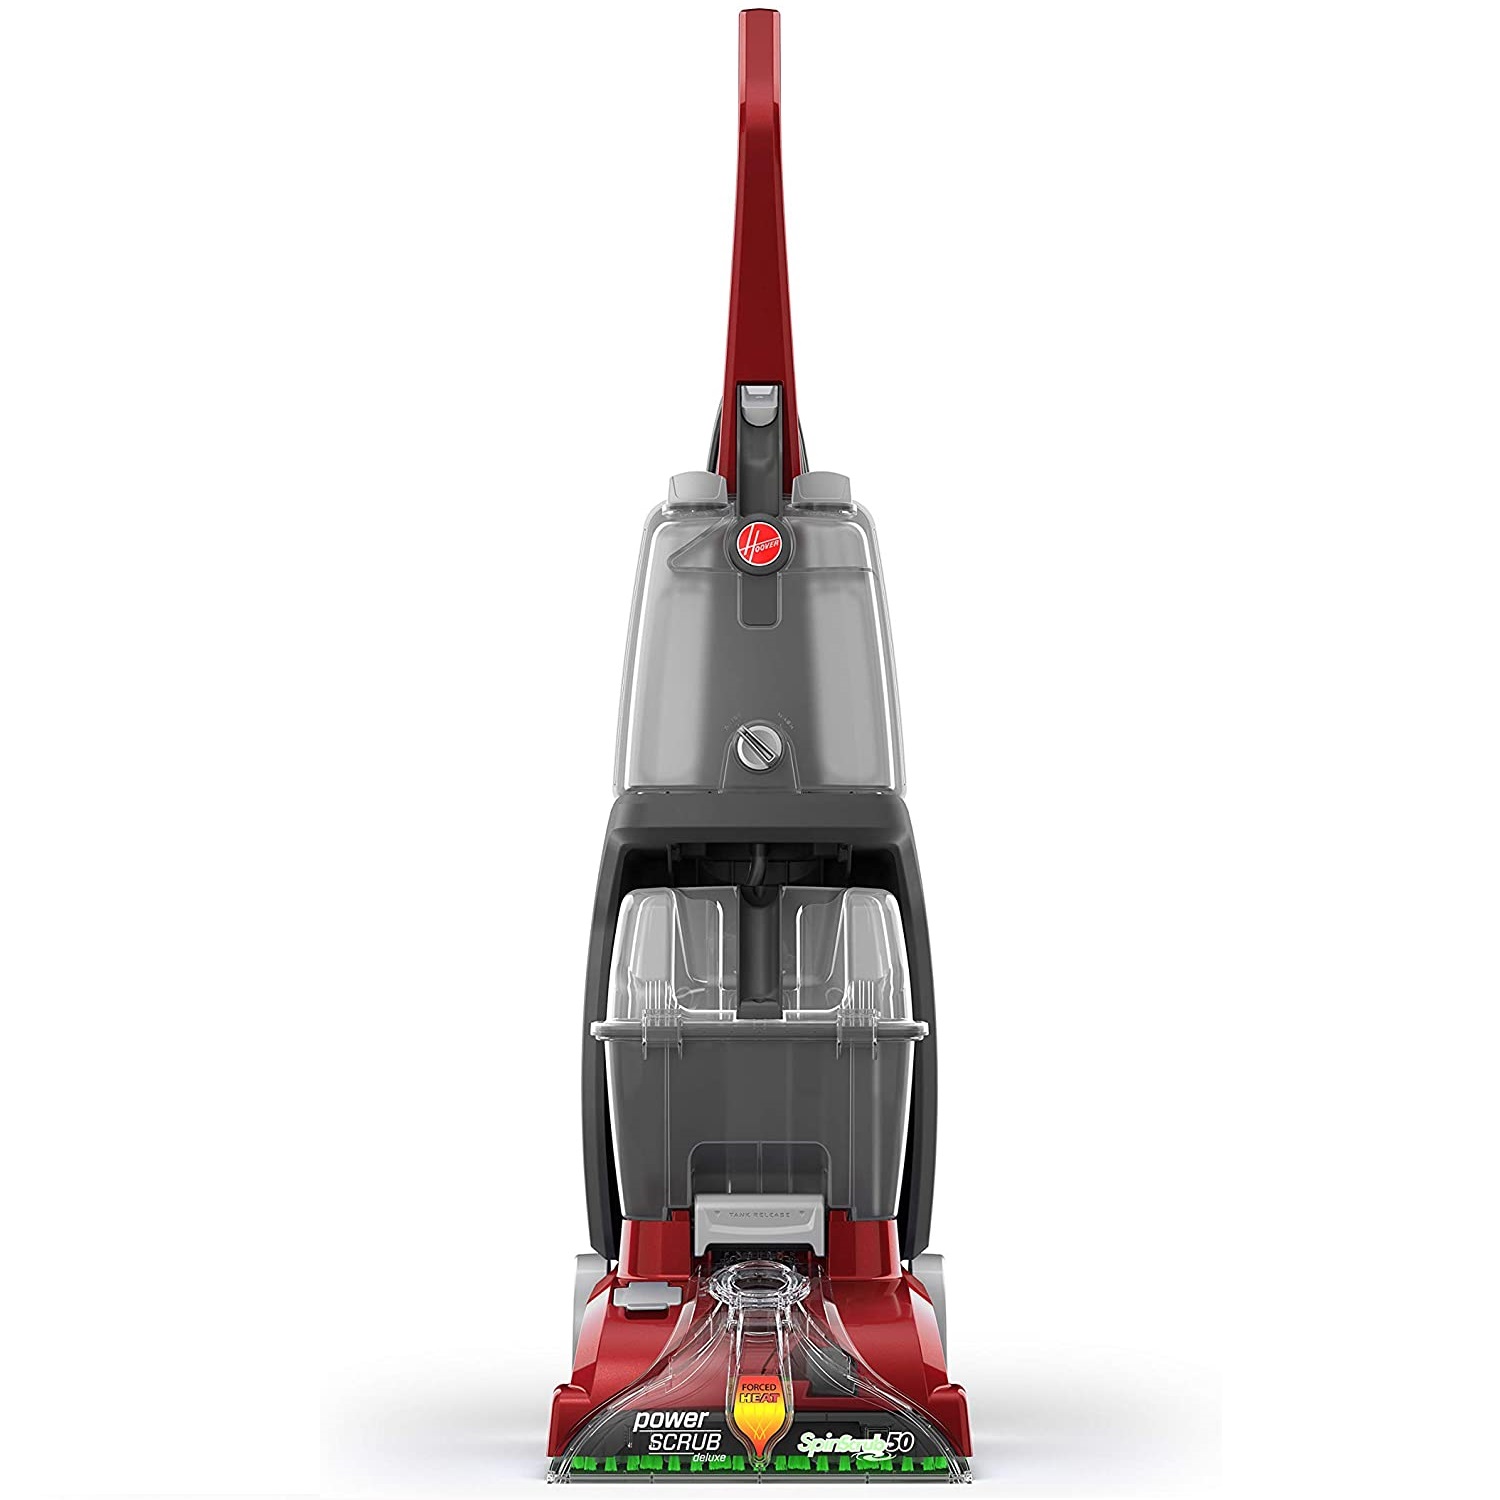 Top 5 Best Hoover Carpet Cleaners [2020 Review